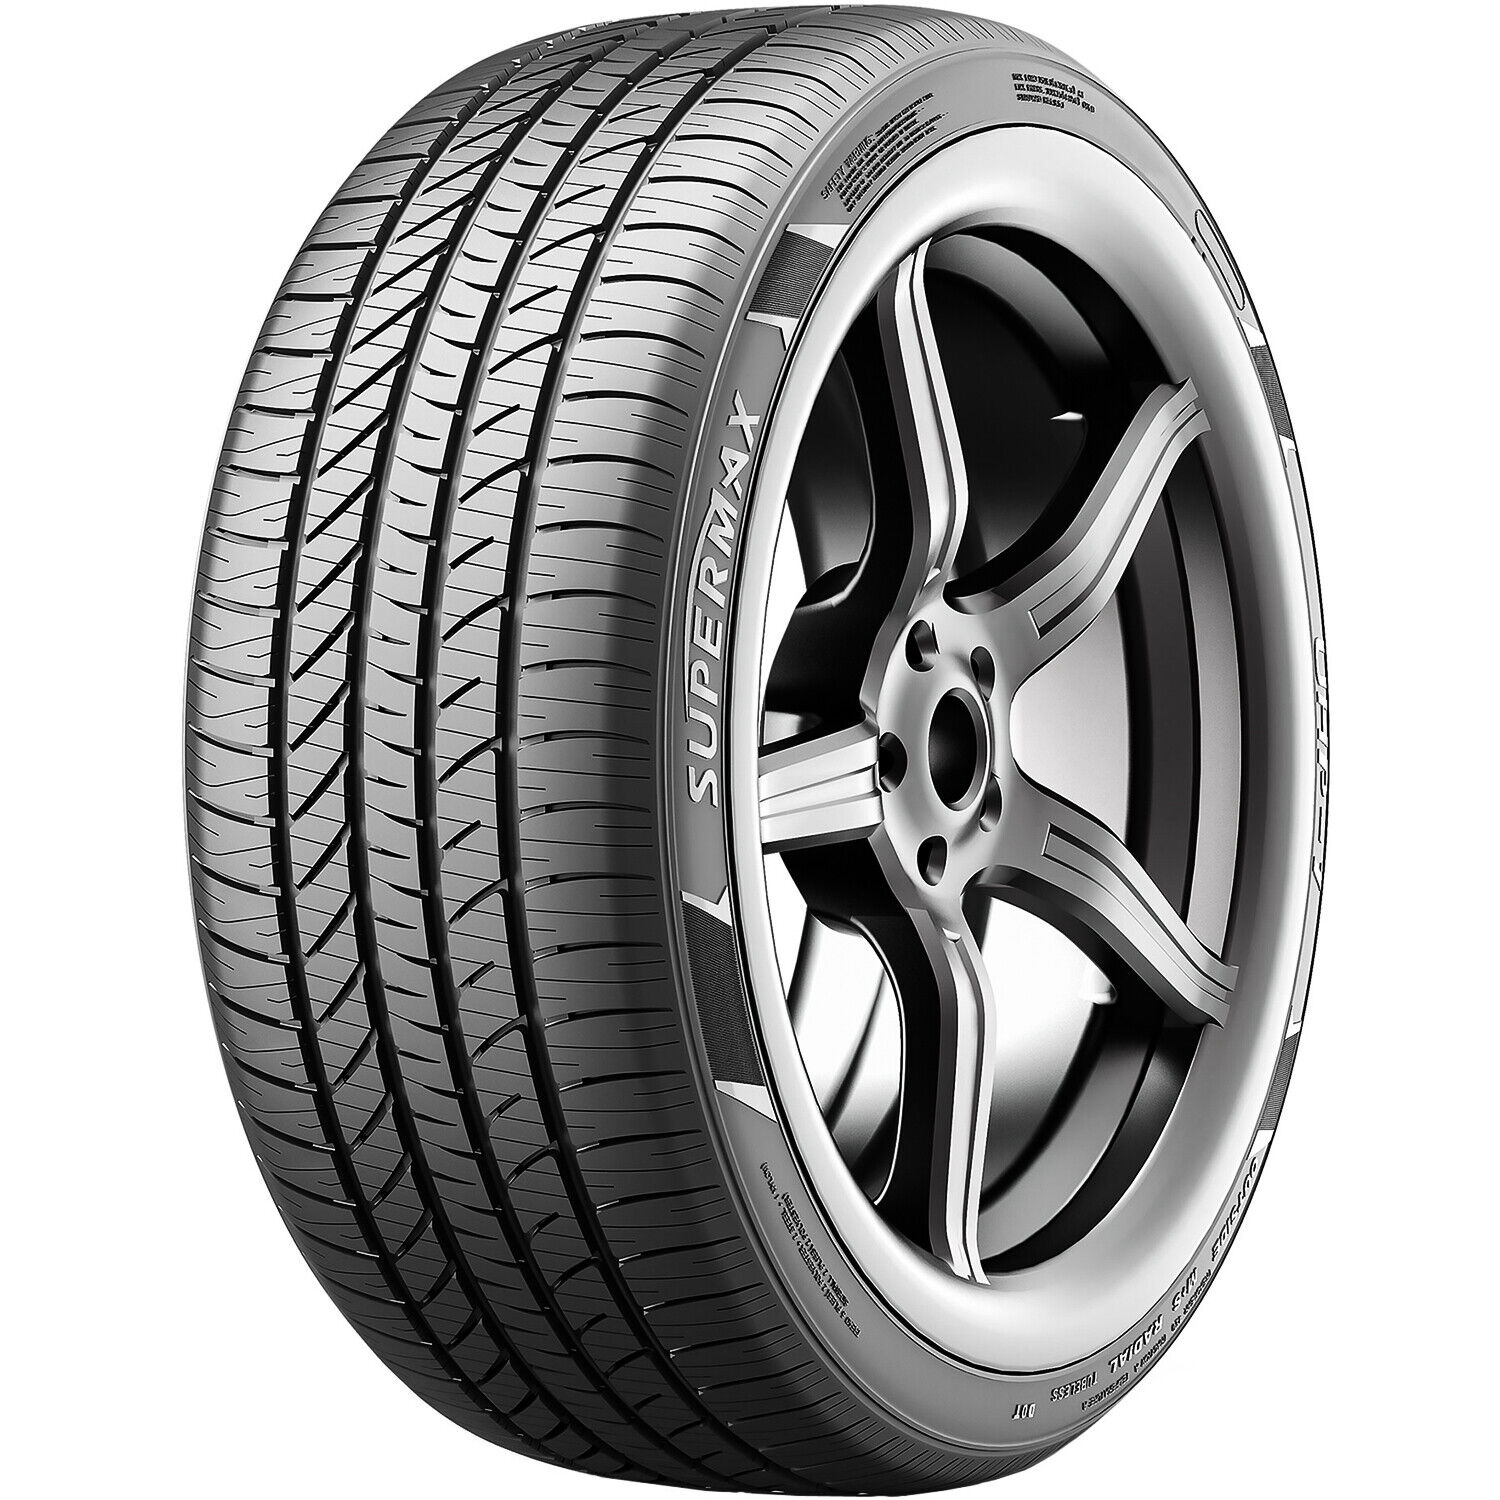 Tire Supermax UHP-1 245/35ZR20 245/35R20 91W AS A/S High Performance